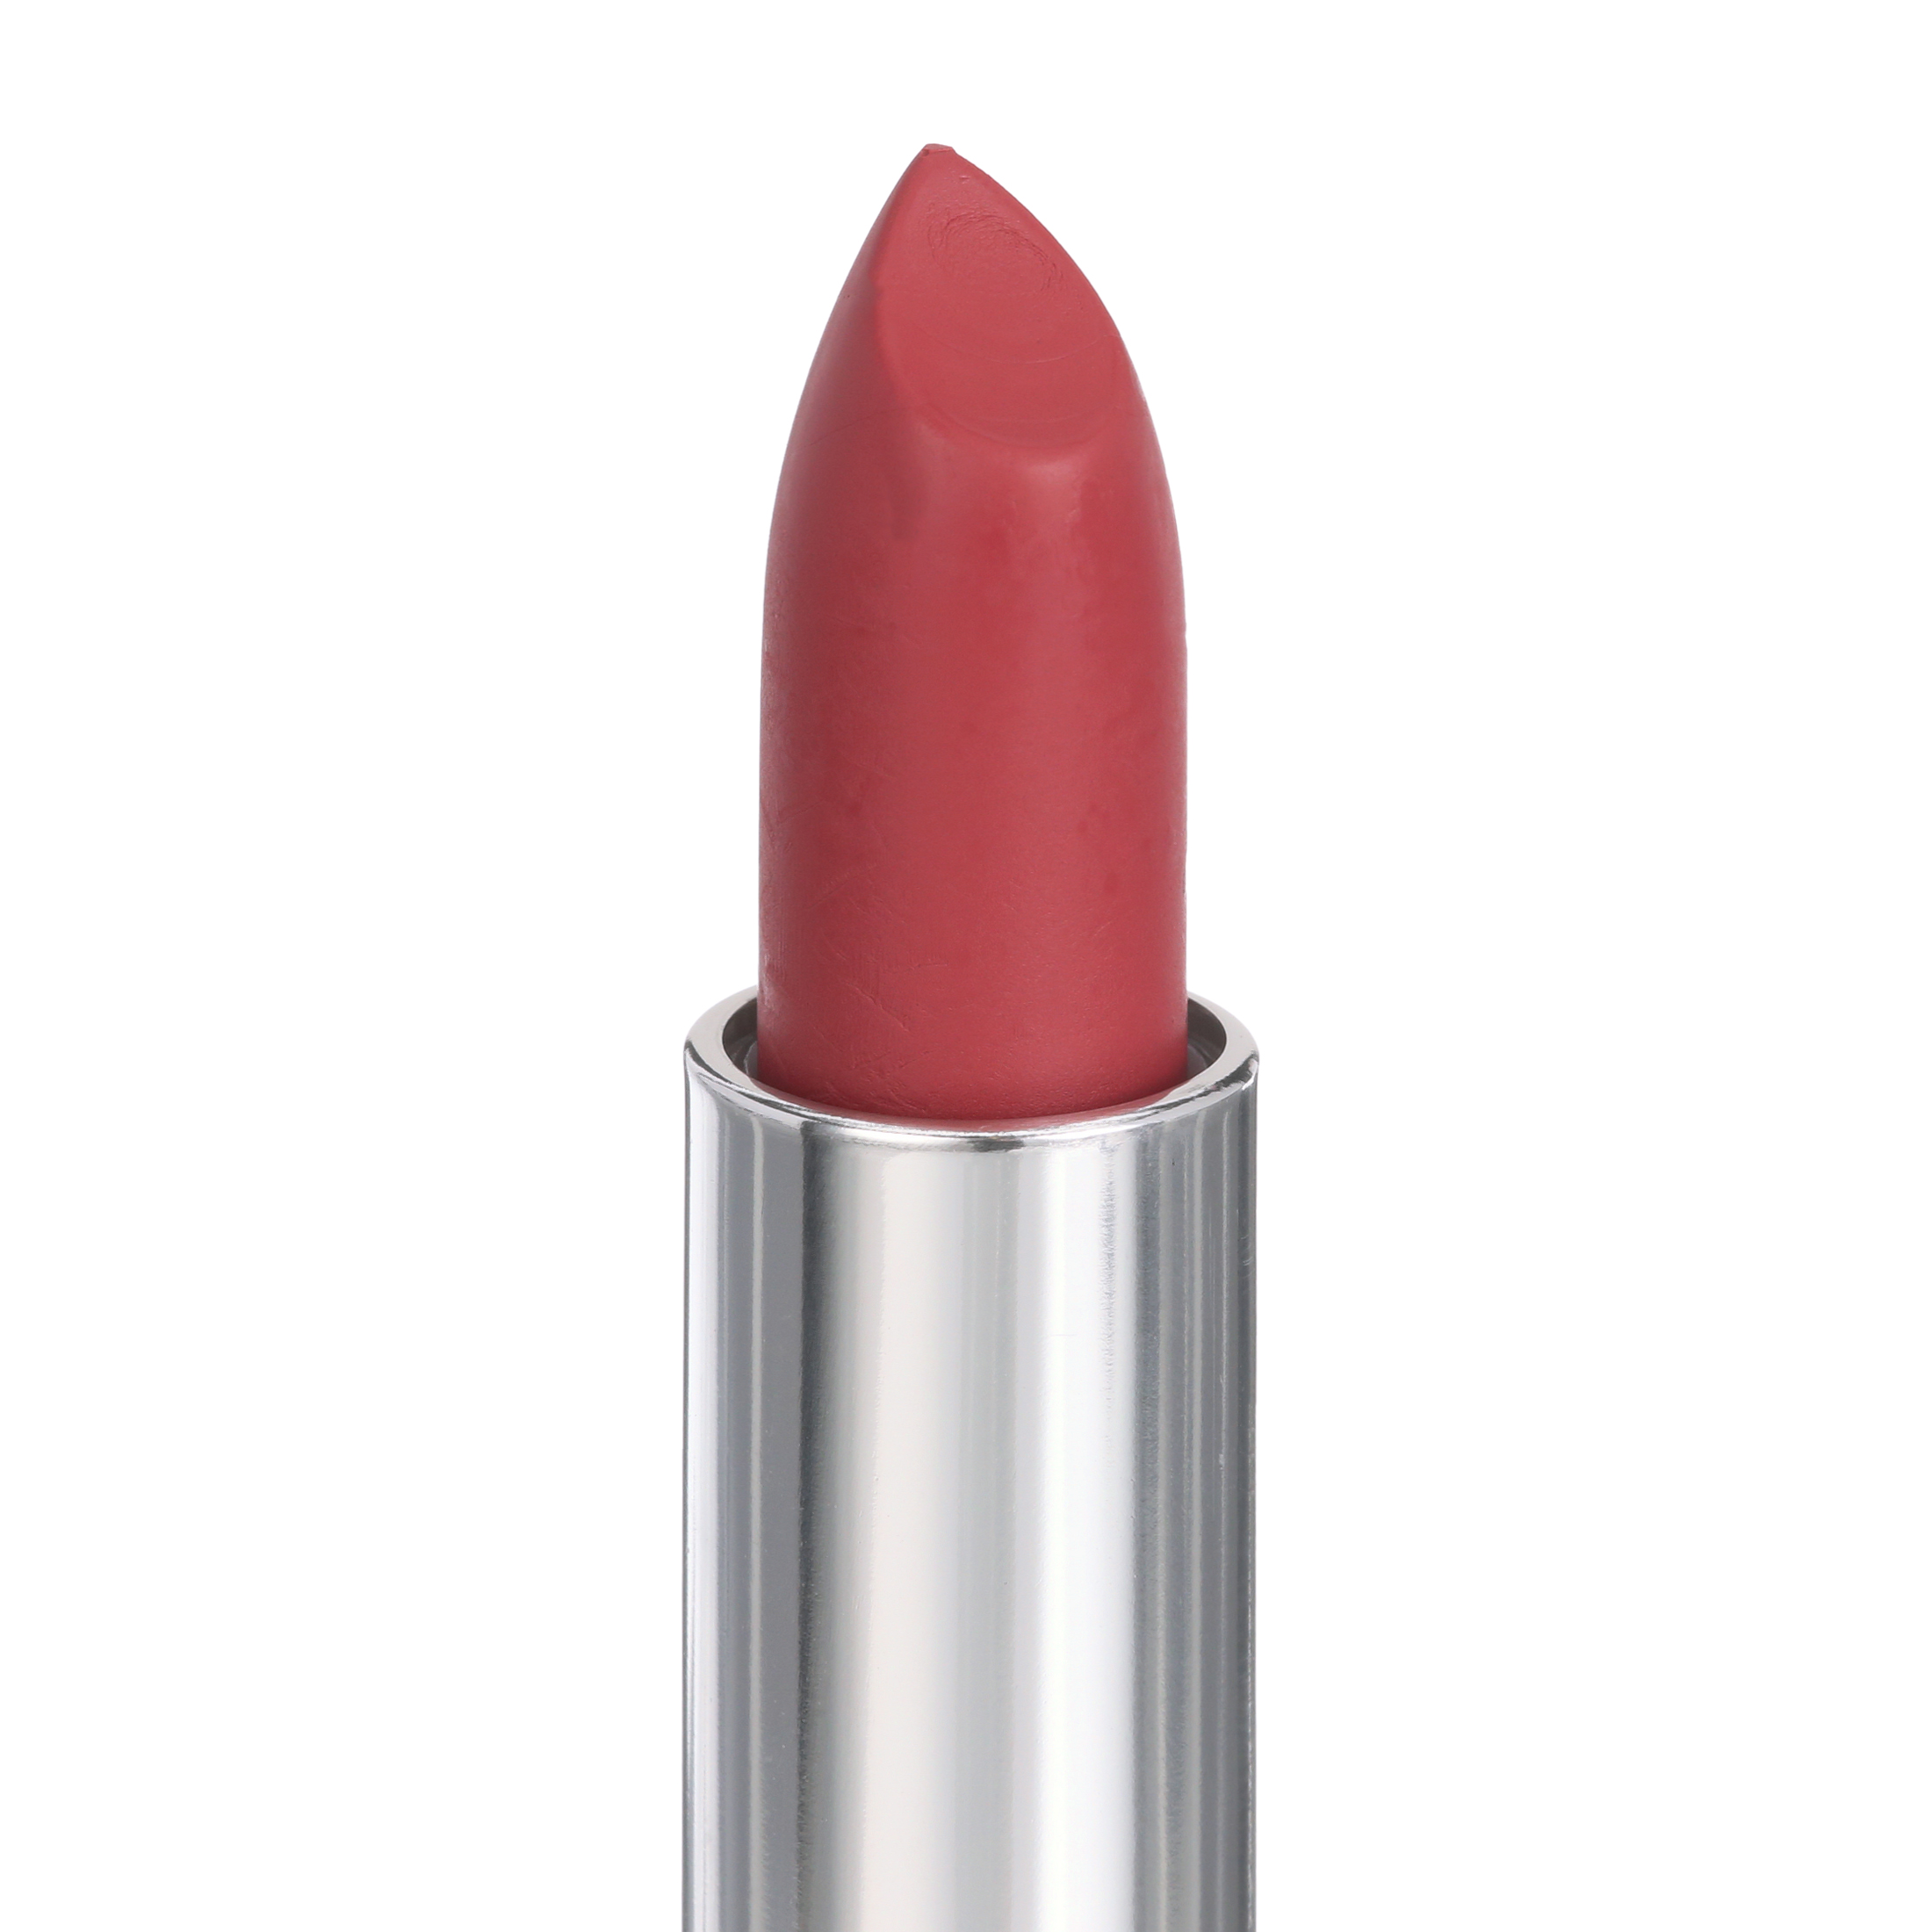 Maybelline Color Sensational Matte Finish Lipstick, Touch Of Spice - image 5 of 9